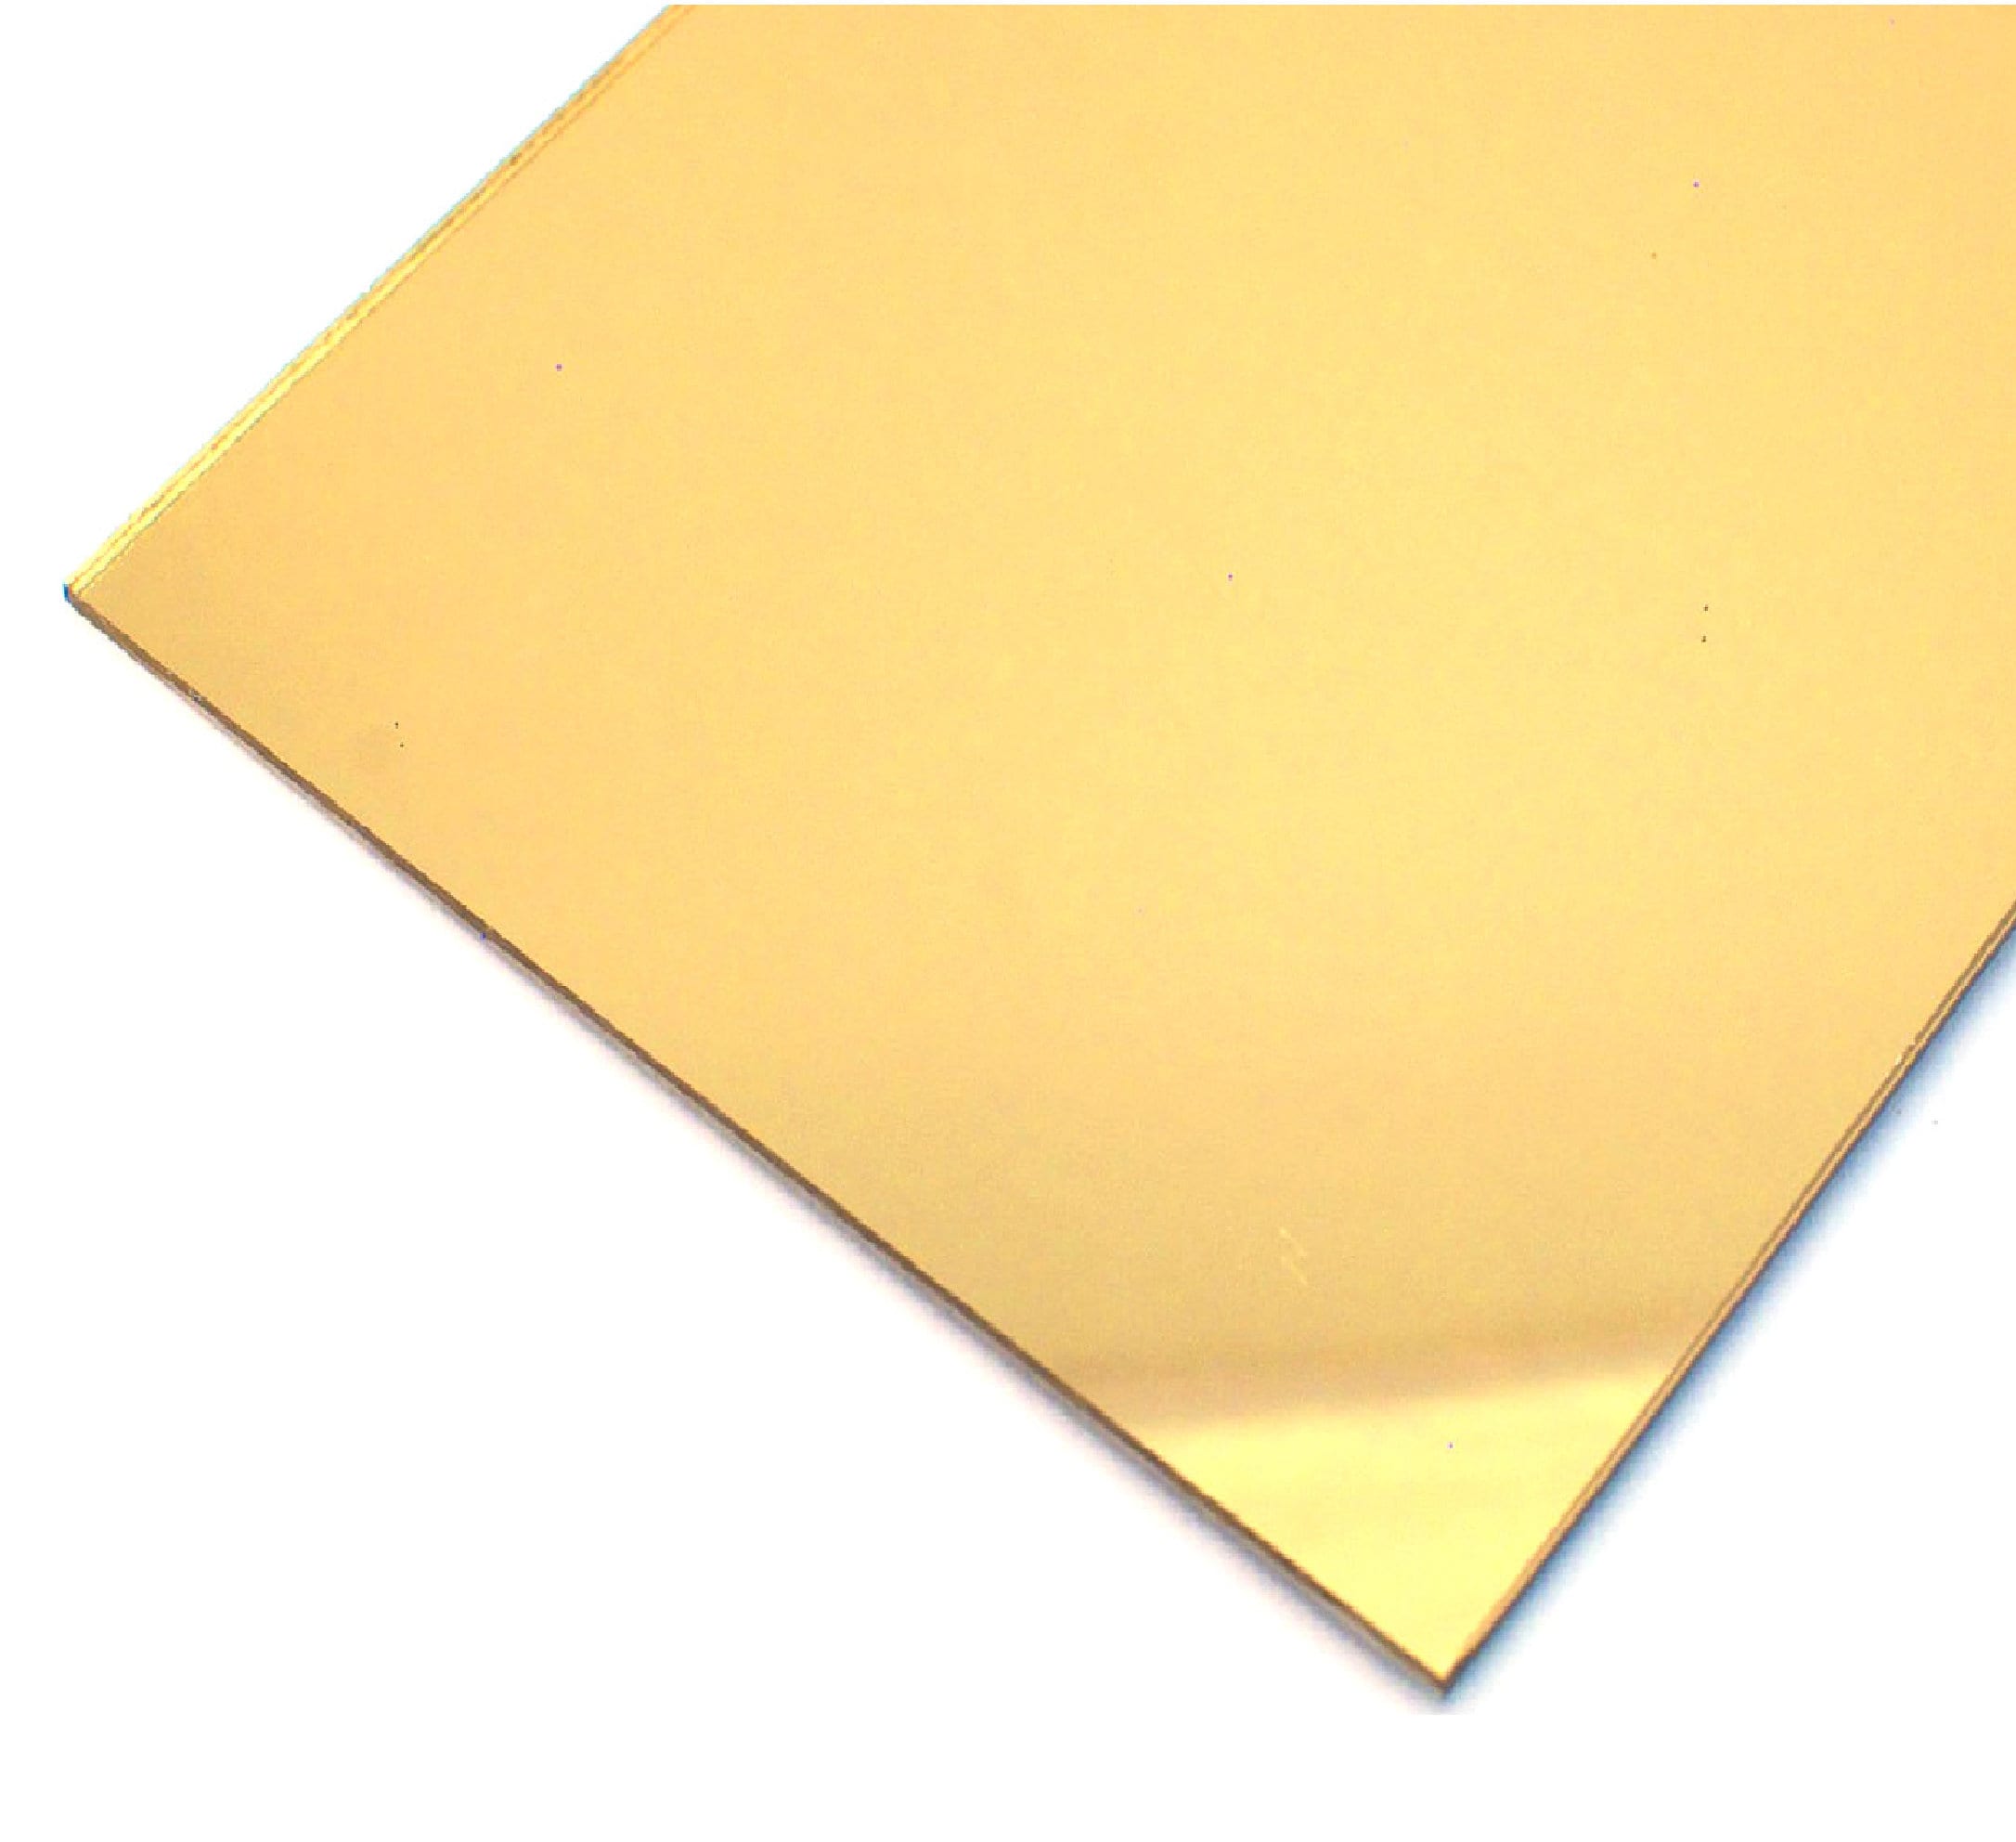 Acrylic Mirror - Silver, Gold or Colour Full Sheets or Cut To Size